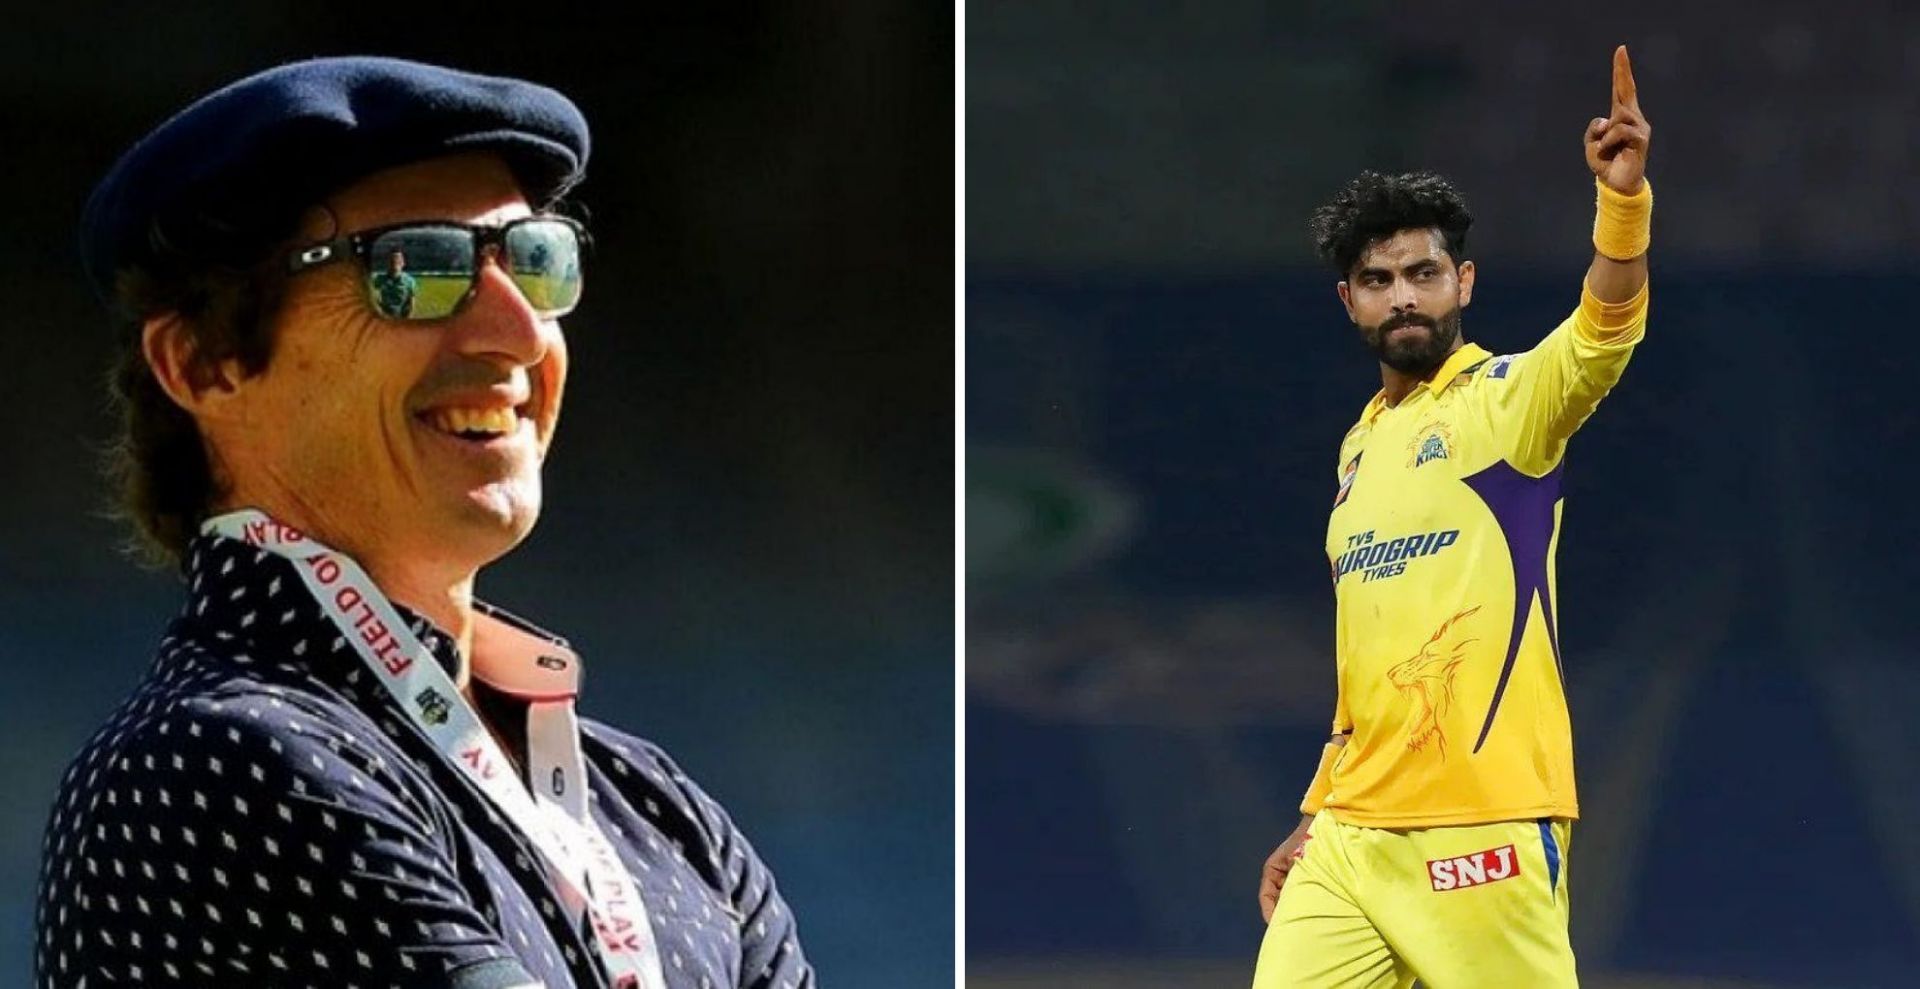 Ravindra Jadeja lost the first four IPL matches as captain